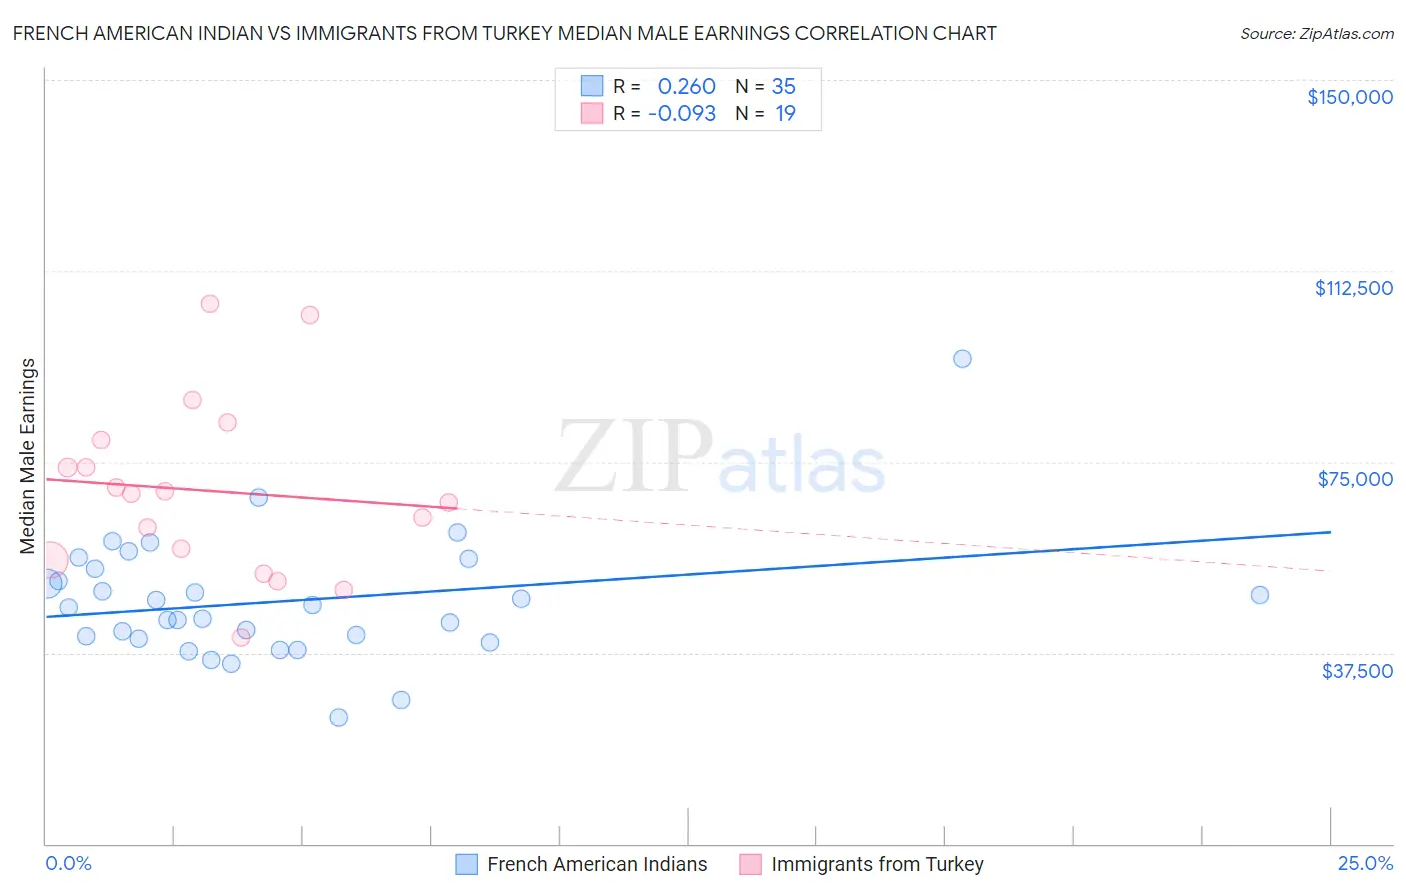 French American Indian vs Immigrants from Turkey Median Male Earnings